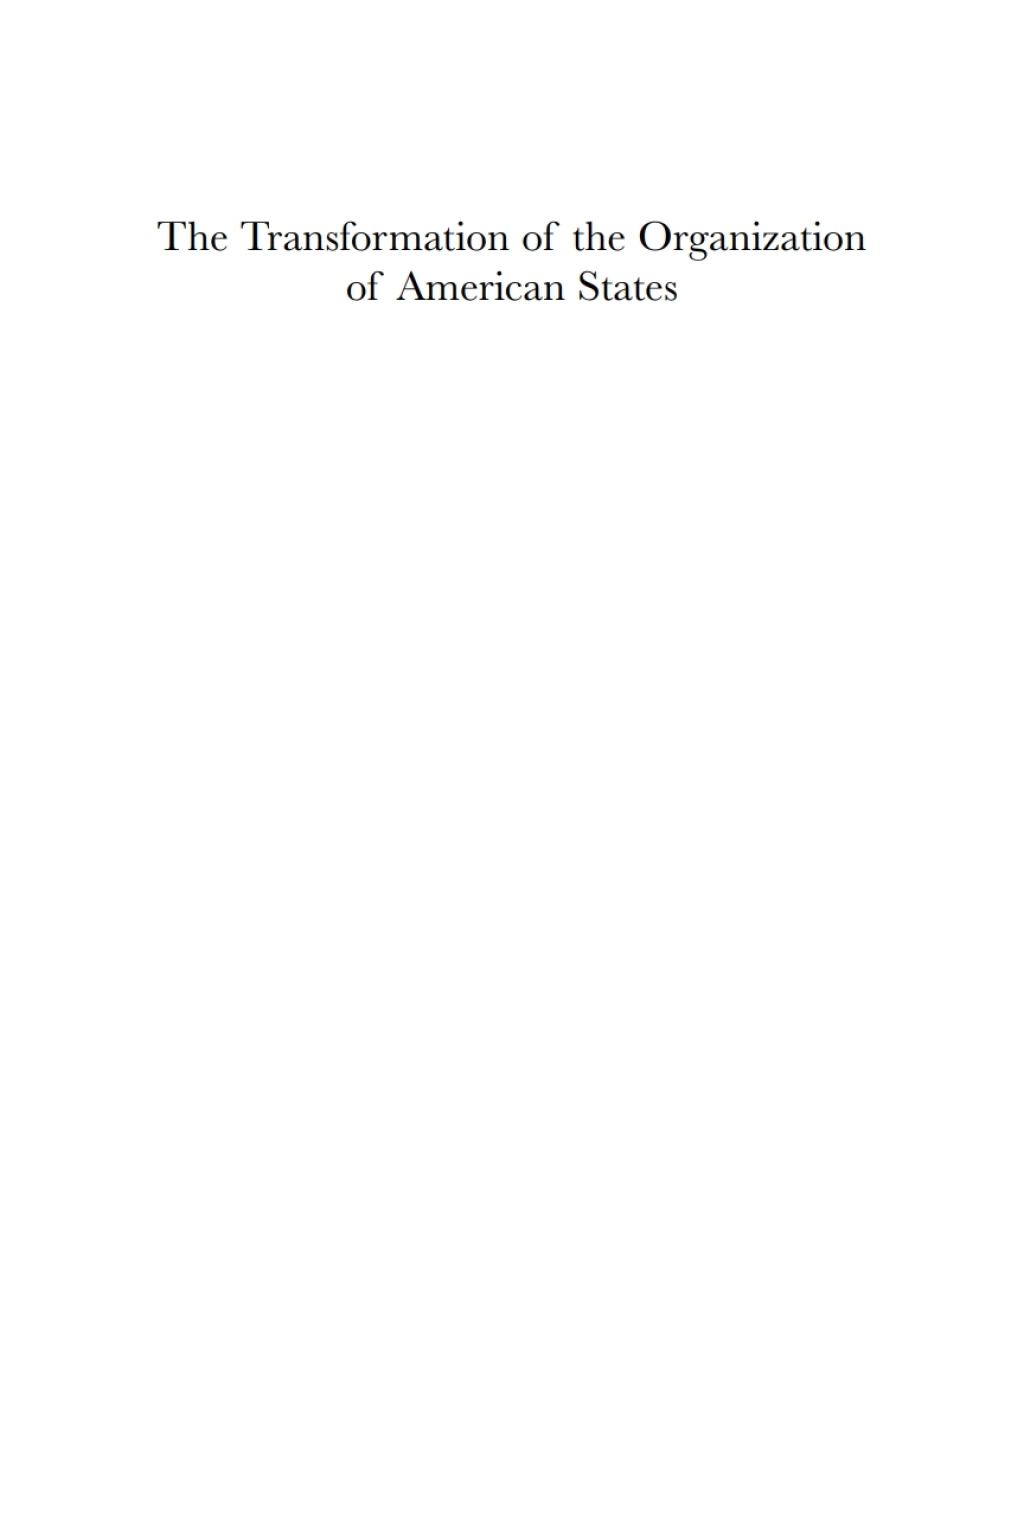 The Transformation of the Organization of American States (eBook) - Betty Horwitz